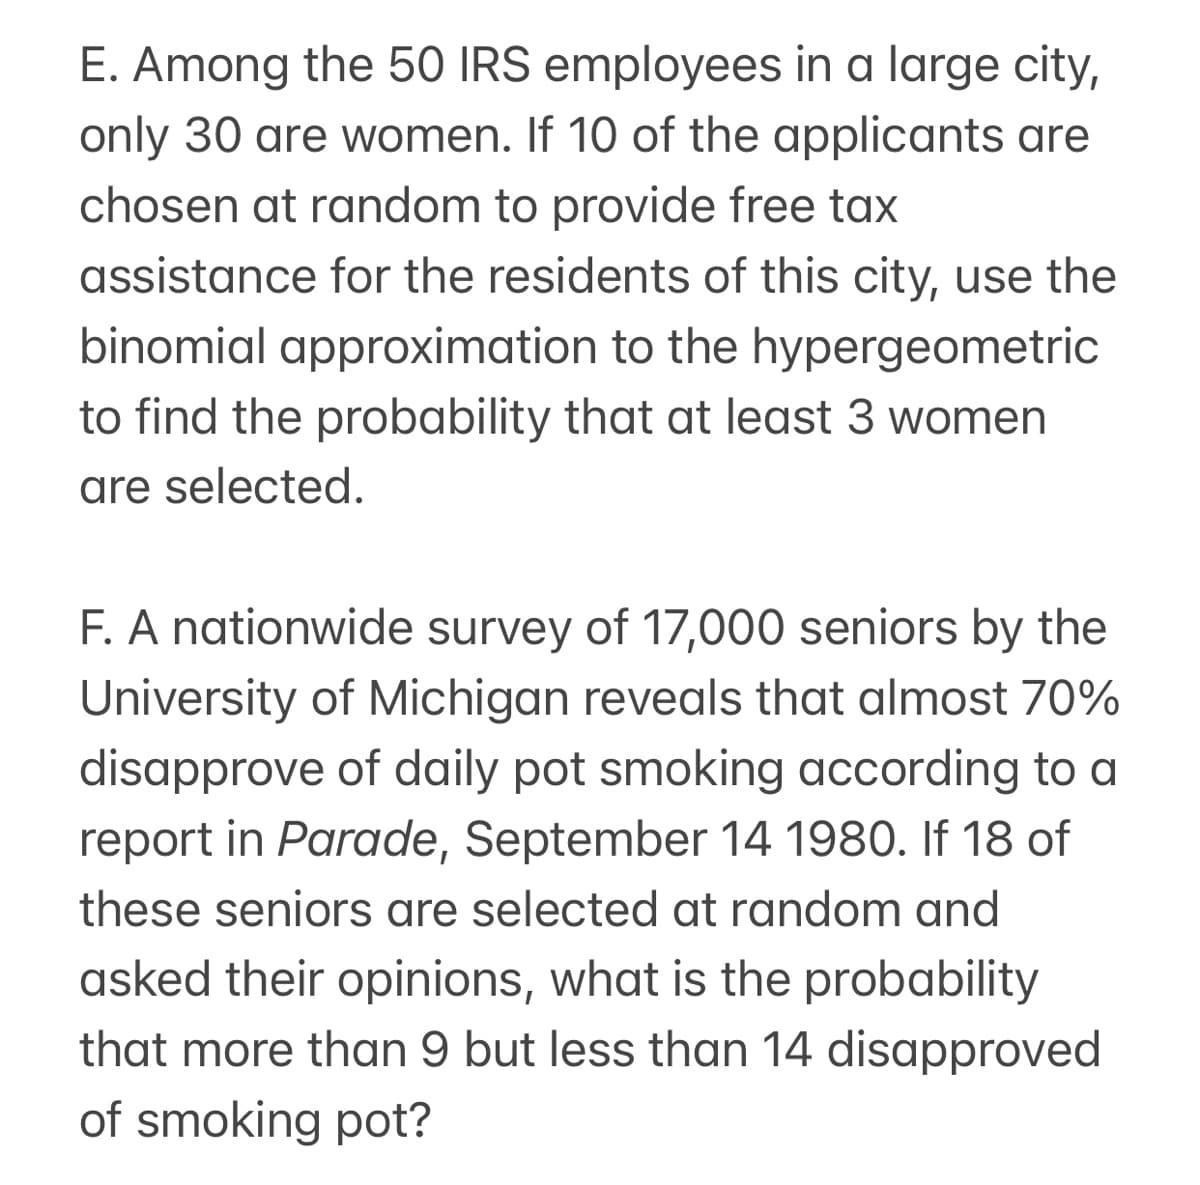 E. Among the 50 IRS employees in a large city,
only 30 are women. If 10 of the applicants are
chosen at random to provide free tax
assistance for the residents of this city, use the
binomial approximation to the hypergeometric
to find the probability that at least 3 women
are selected.
F. A nationwide survey of 17,000 seniors by the
University of Michigan reveals that almost 70%
disapprove of daily pot smoking according to a
report in Parade, September 14 1980. If 18 of
these seniors are selected at random and
asked their opinions, what is the probability
that more than 9 but less than 14 disapproved
of smoking pot?